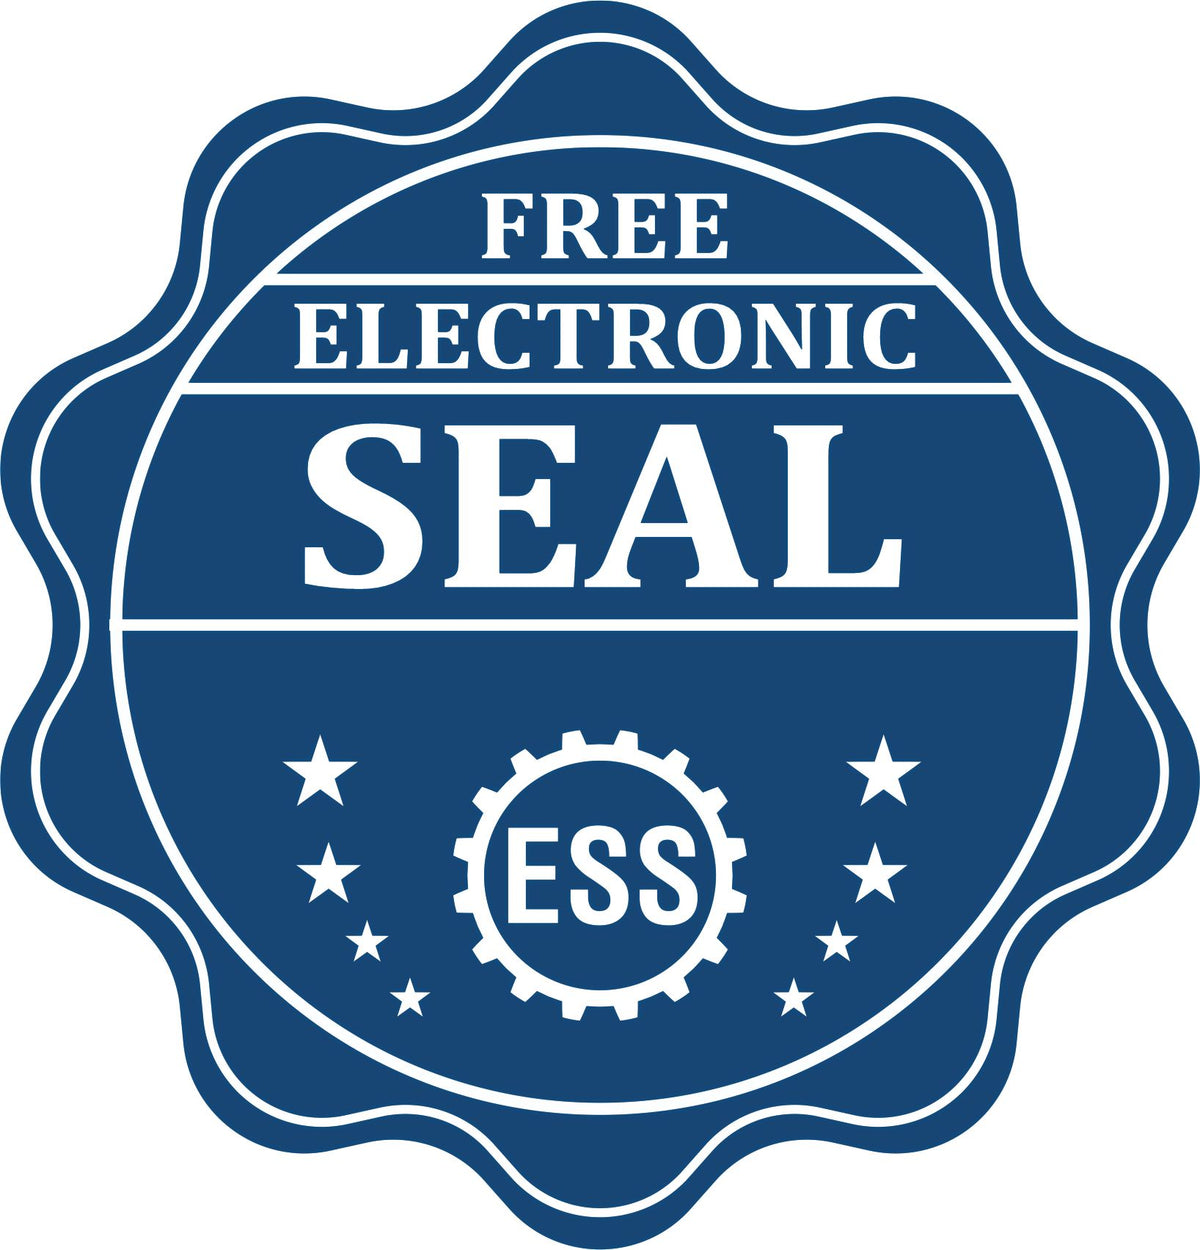 A badge showing a free electronic seal for the Virginia Geologist Desk Seal with stars and the ESS gear on the emblem.